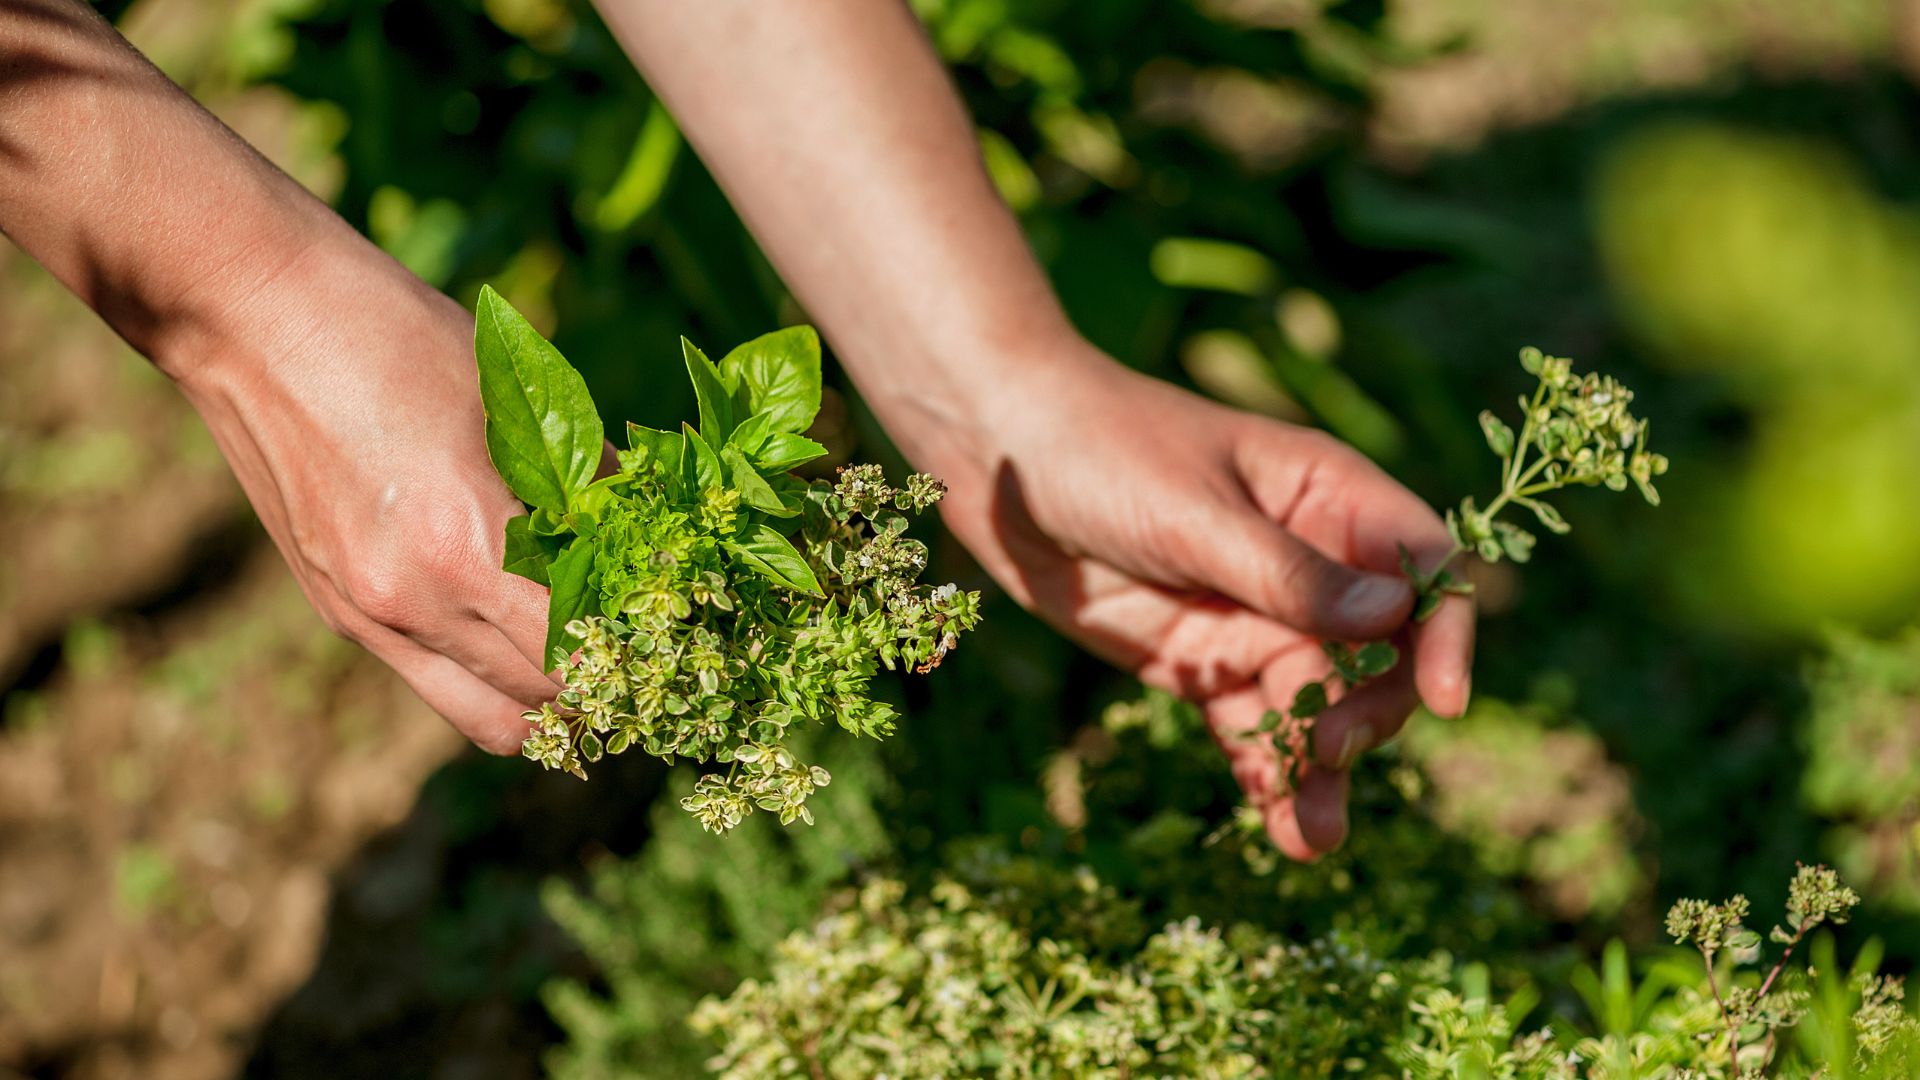 Here’s The Best Way To Harvest Oregano From Your Garden